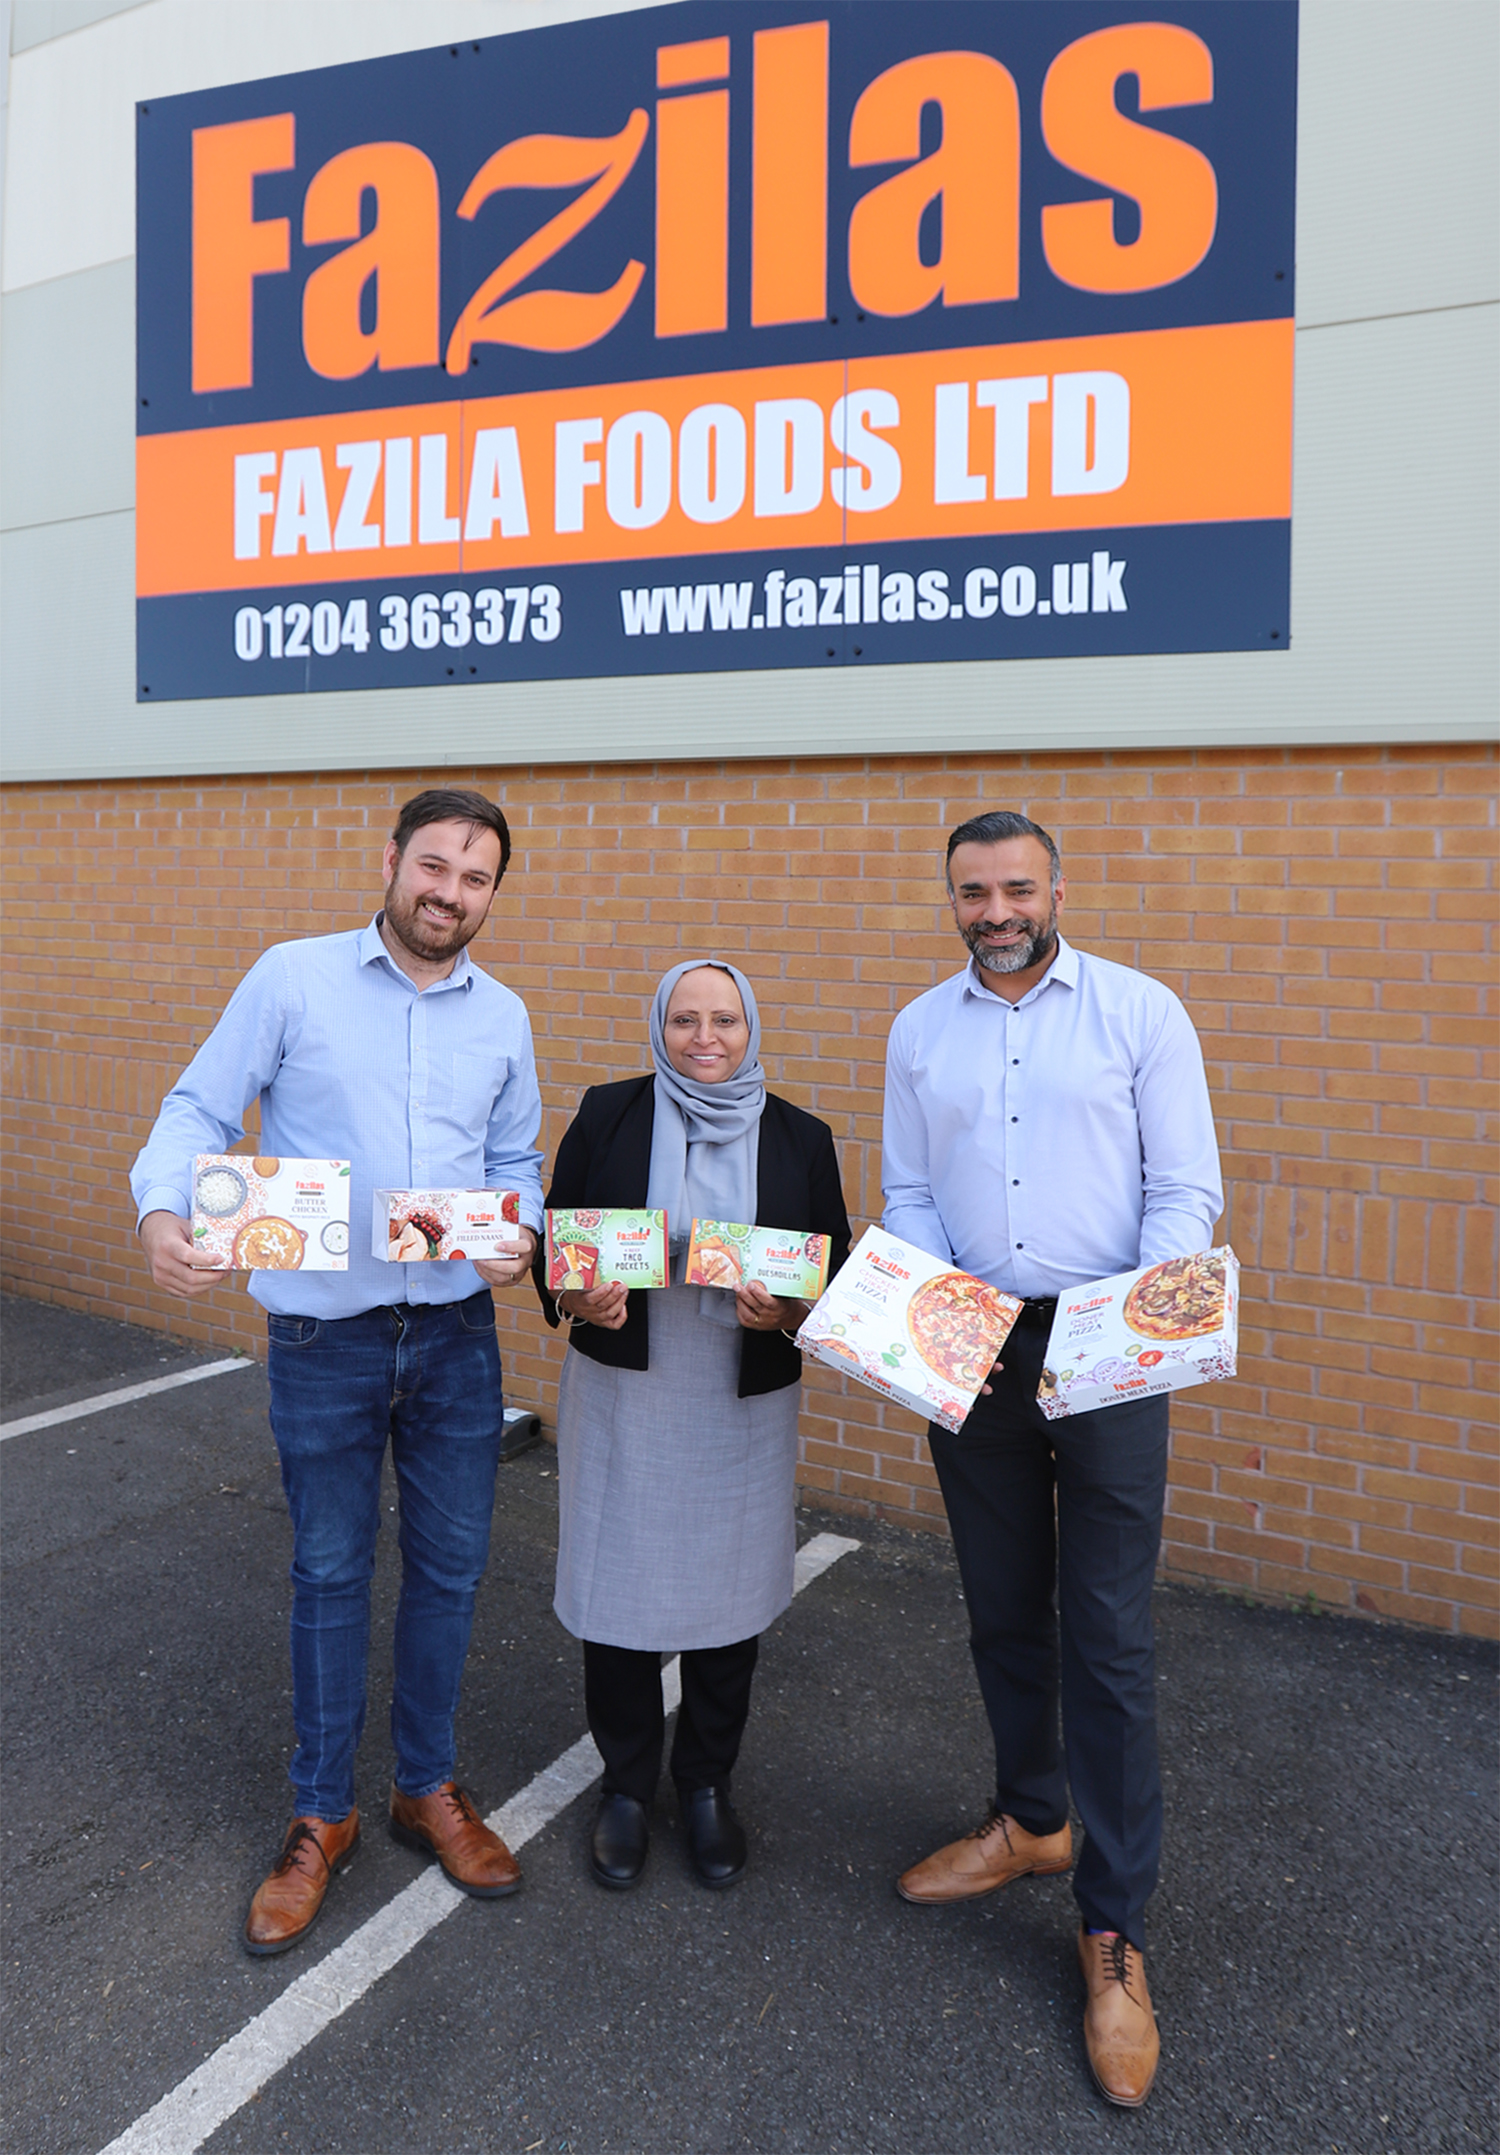 Fazilas spice up product range with new flavoursome meals and snacks